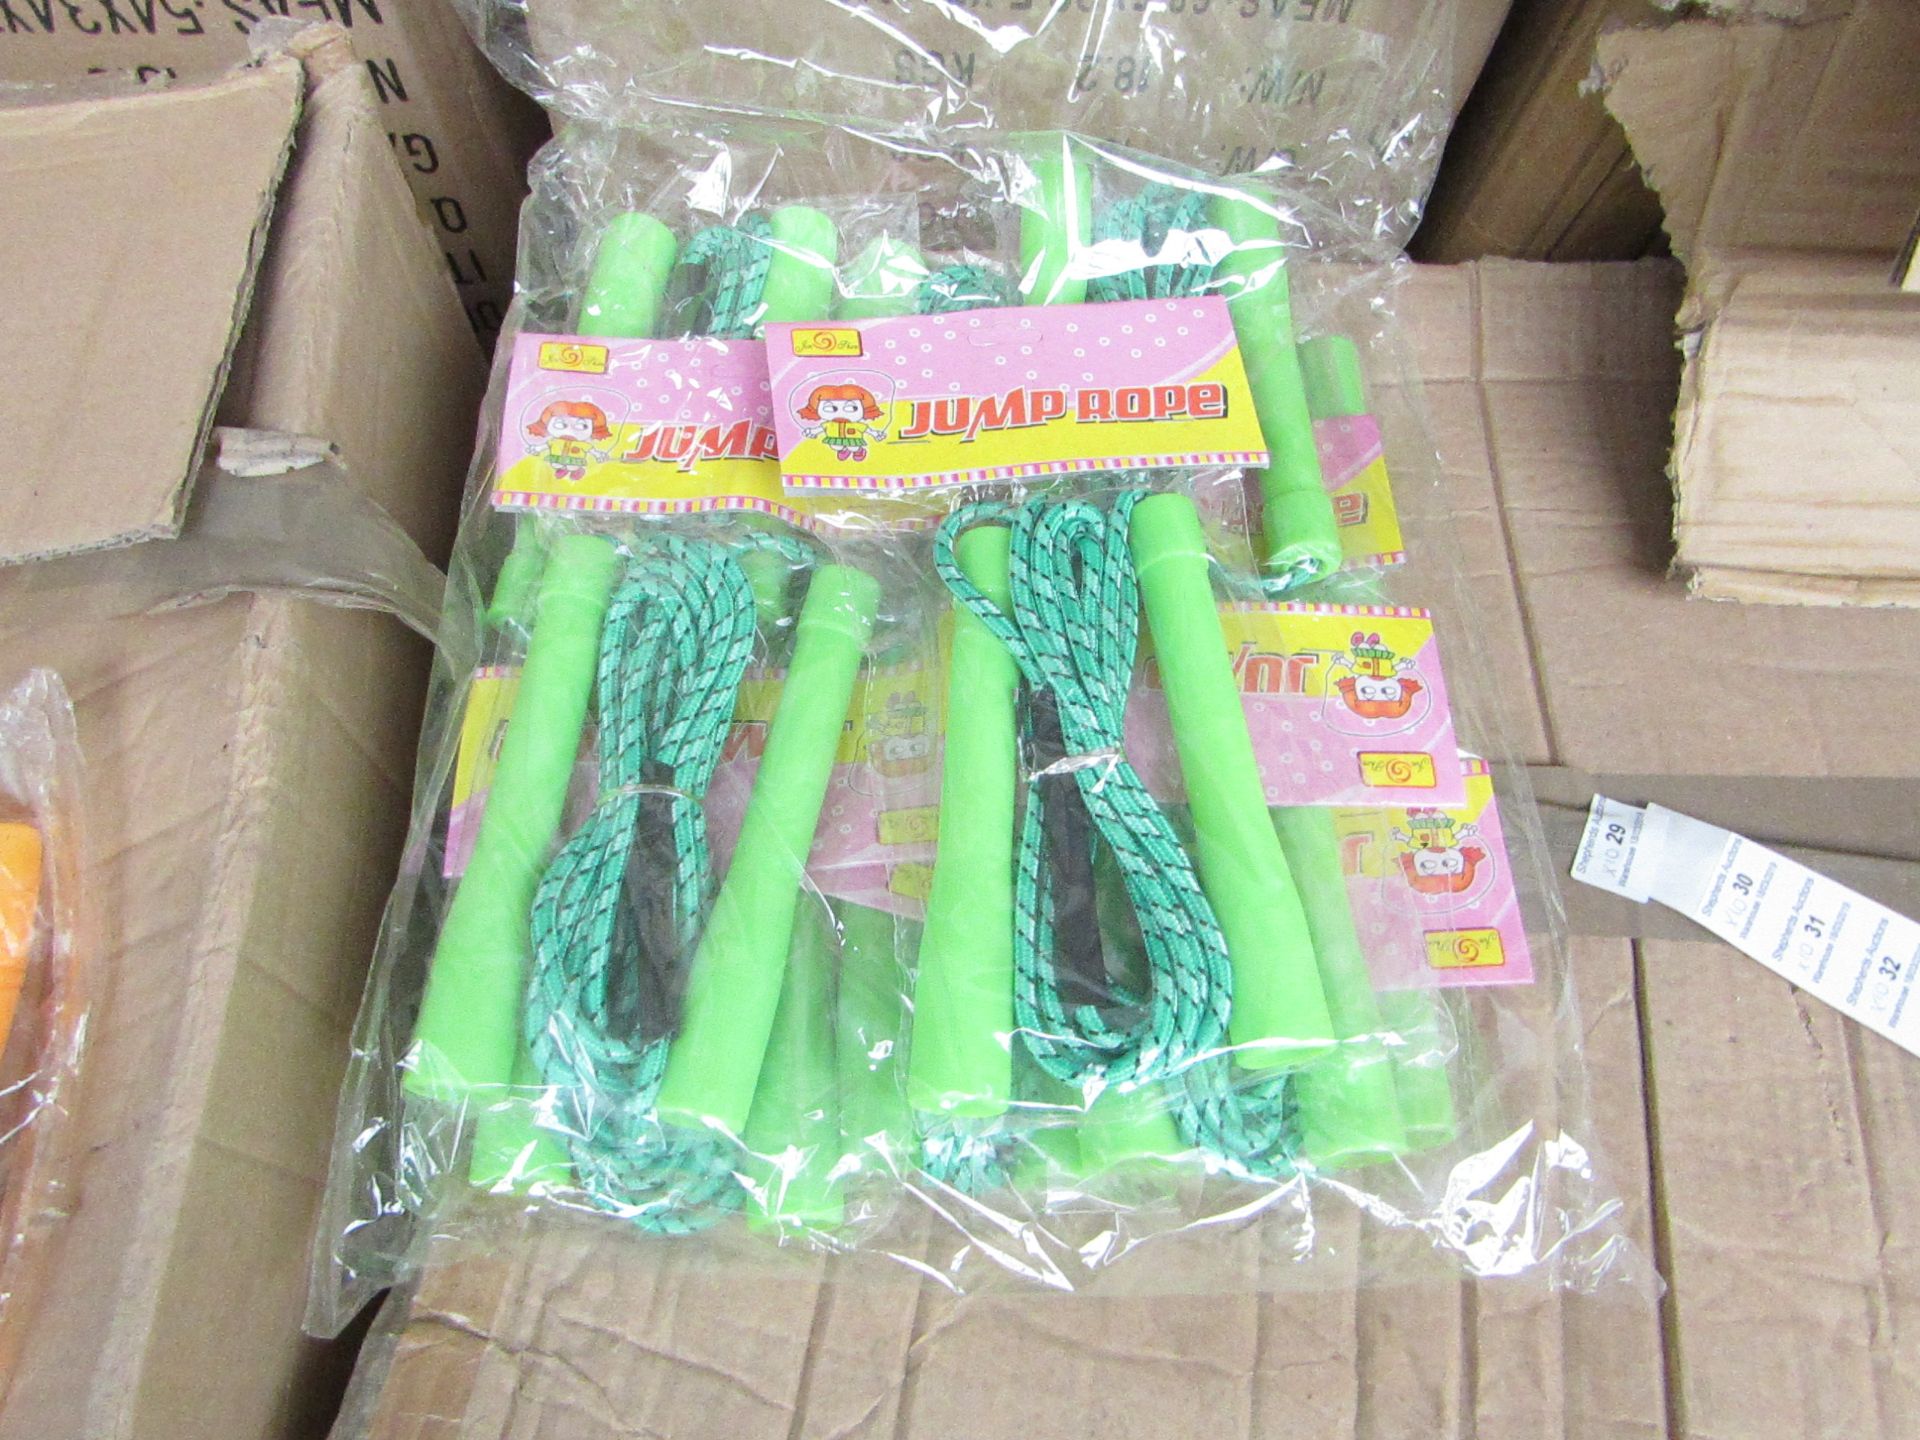 10x Leaping ability Plastic handle skipping ropes.